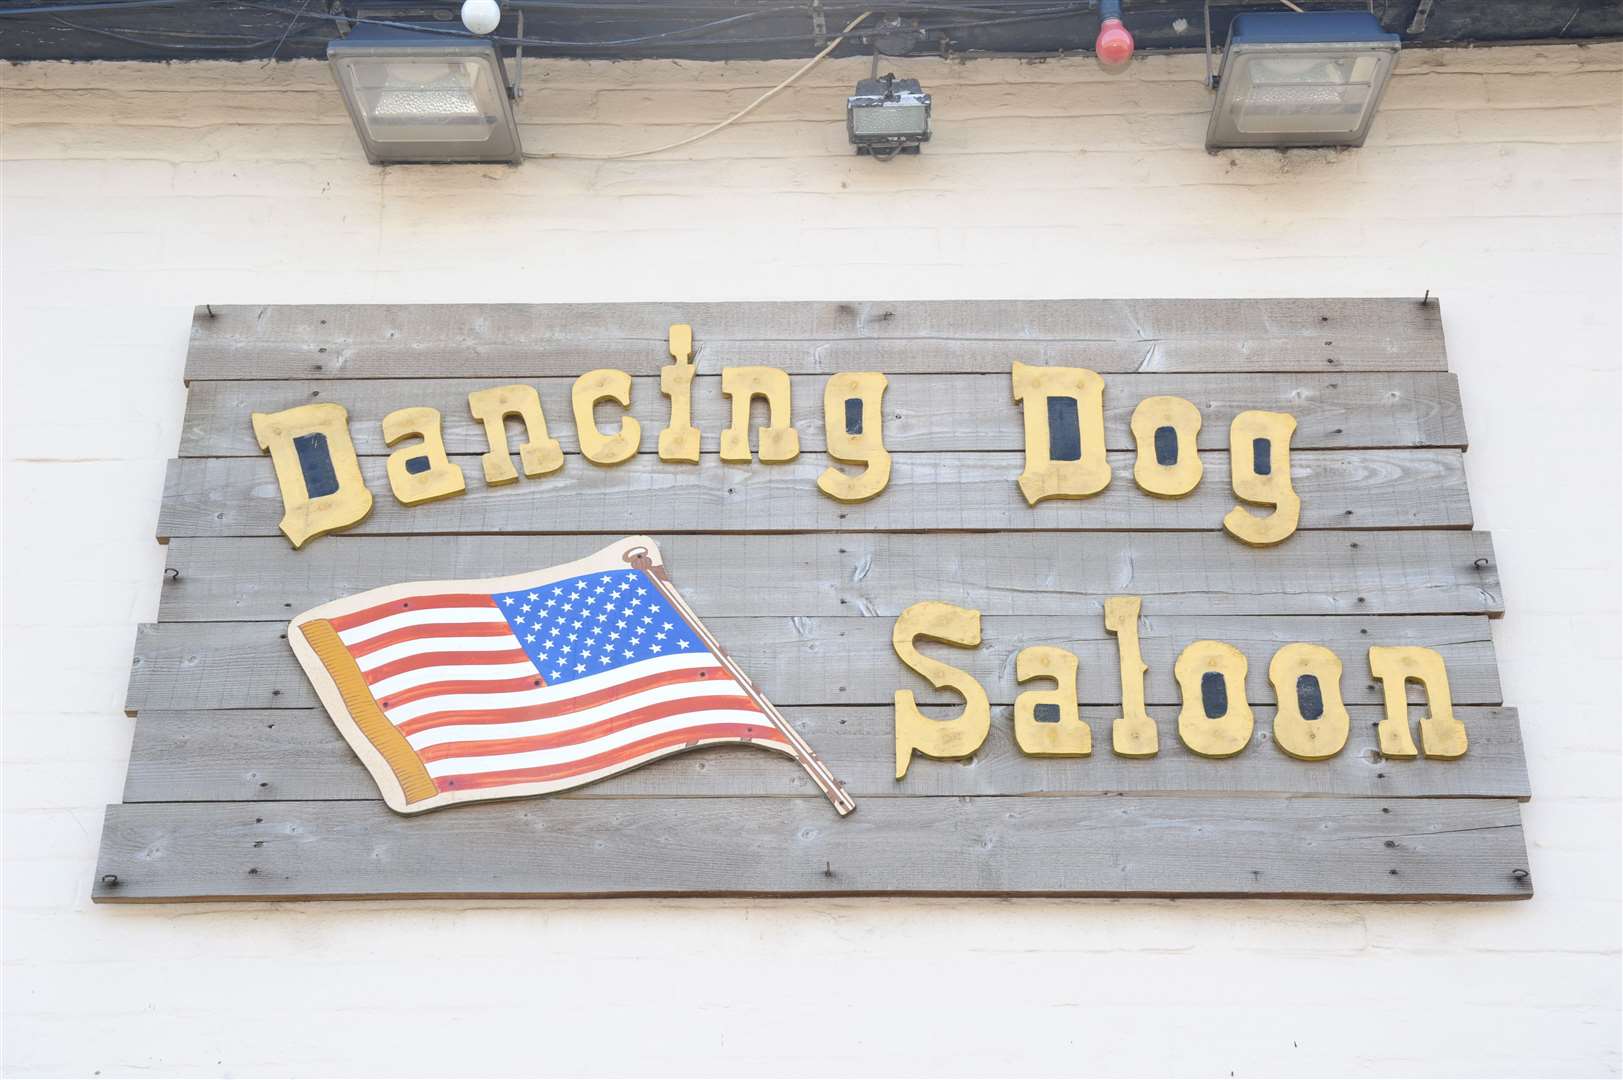 The Dancing Dog Saloon closed after 20 years citing increasing financial pressures. Picture: Simon Hildrew